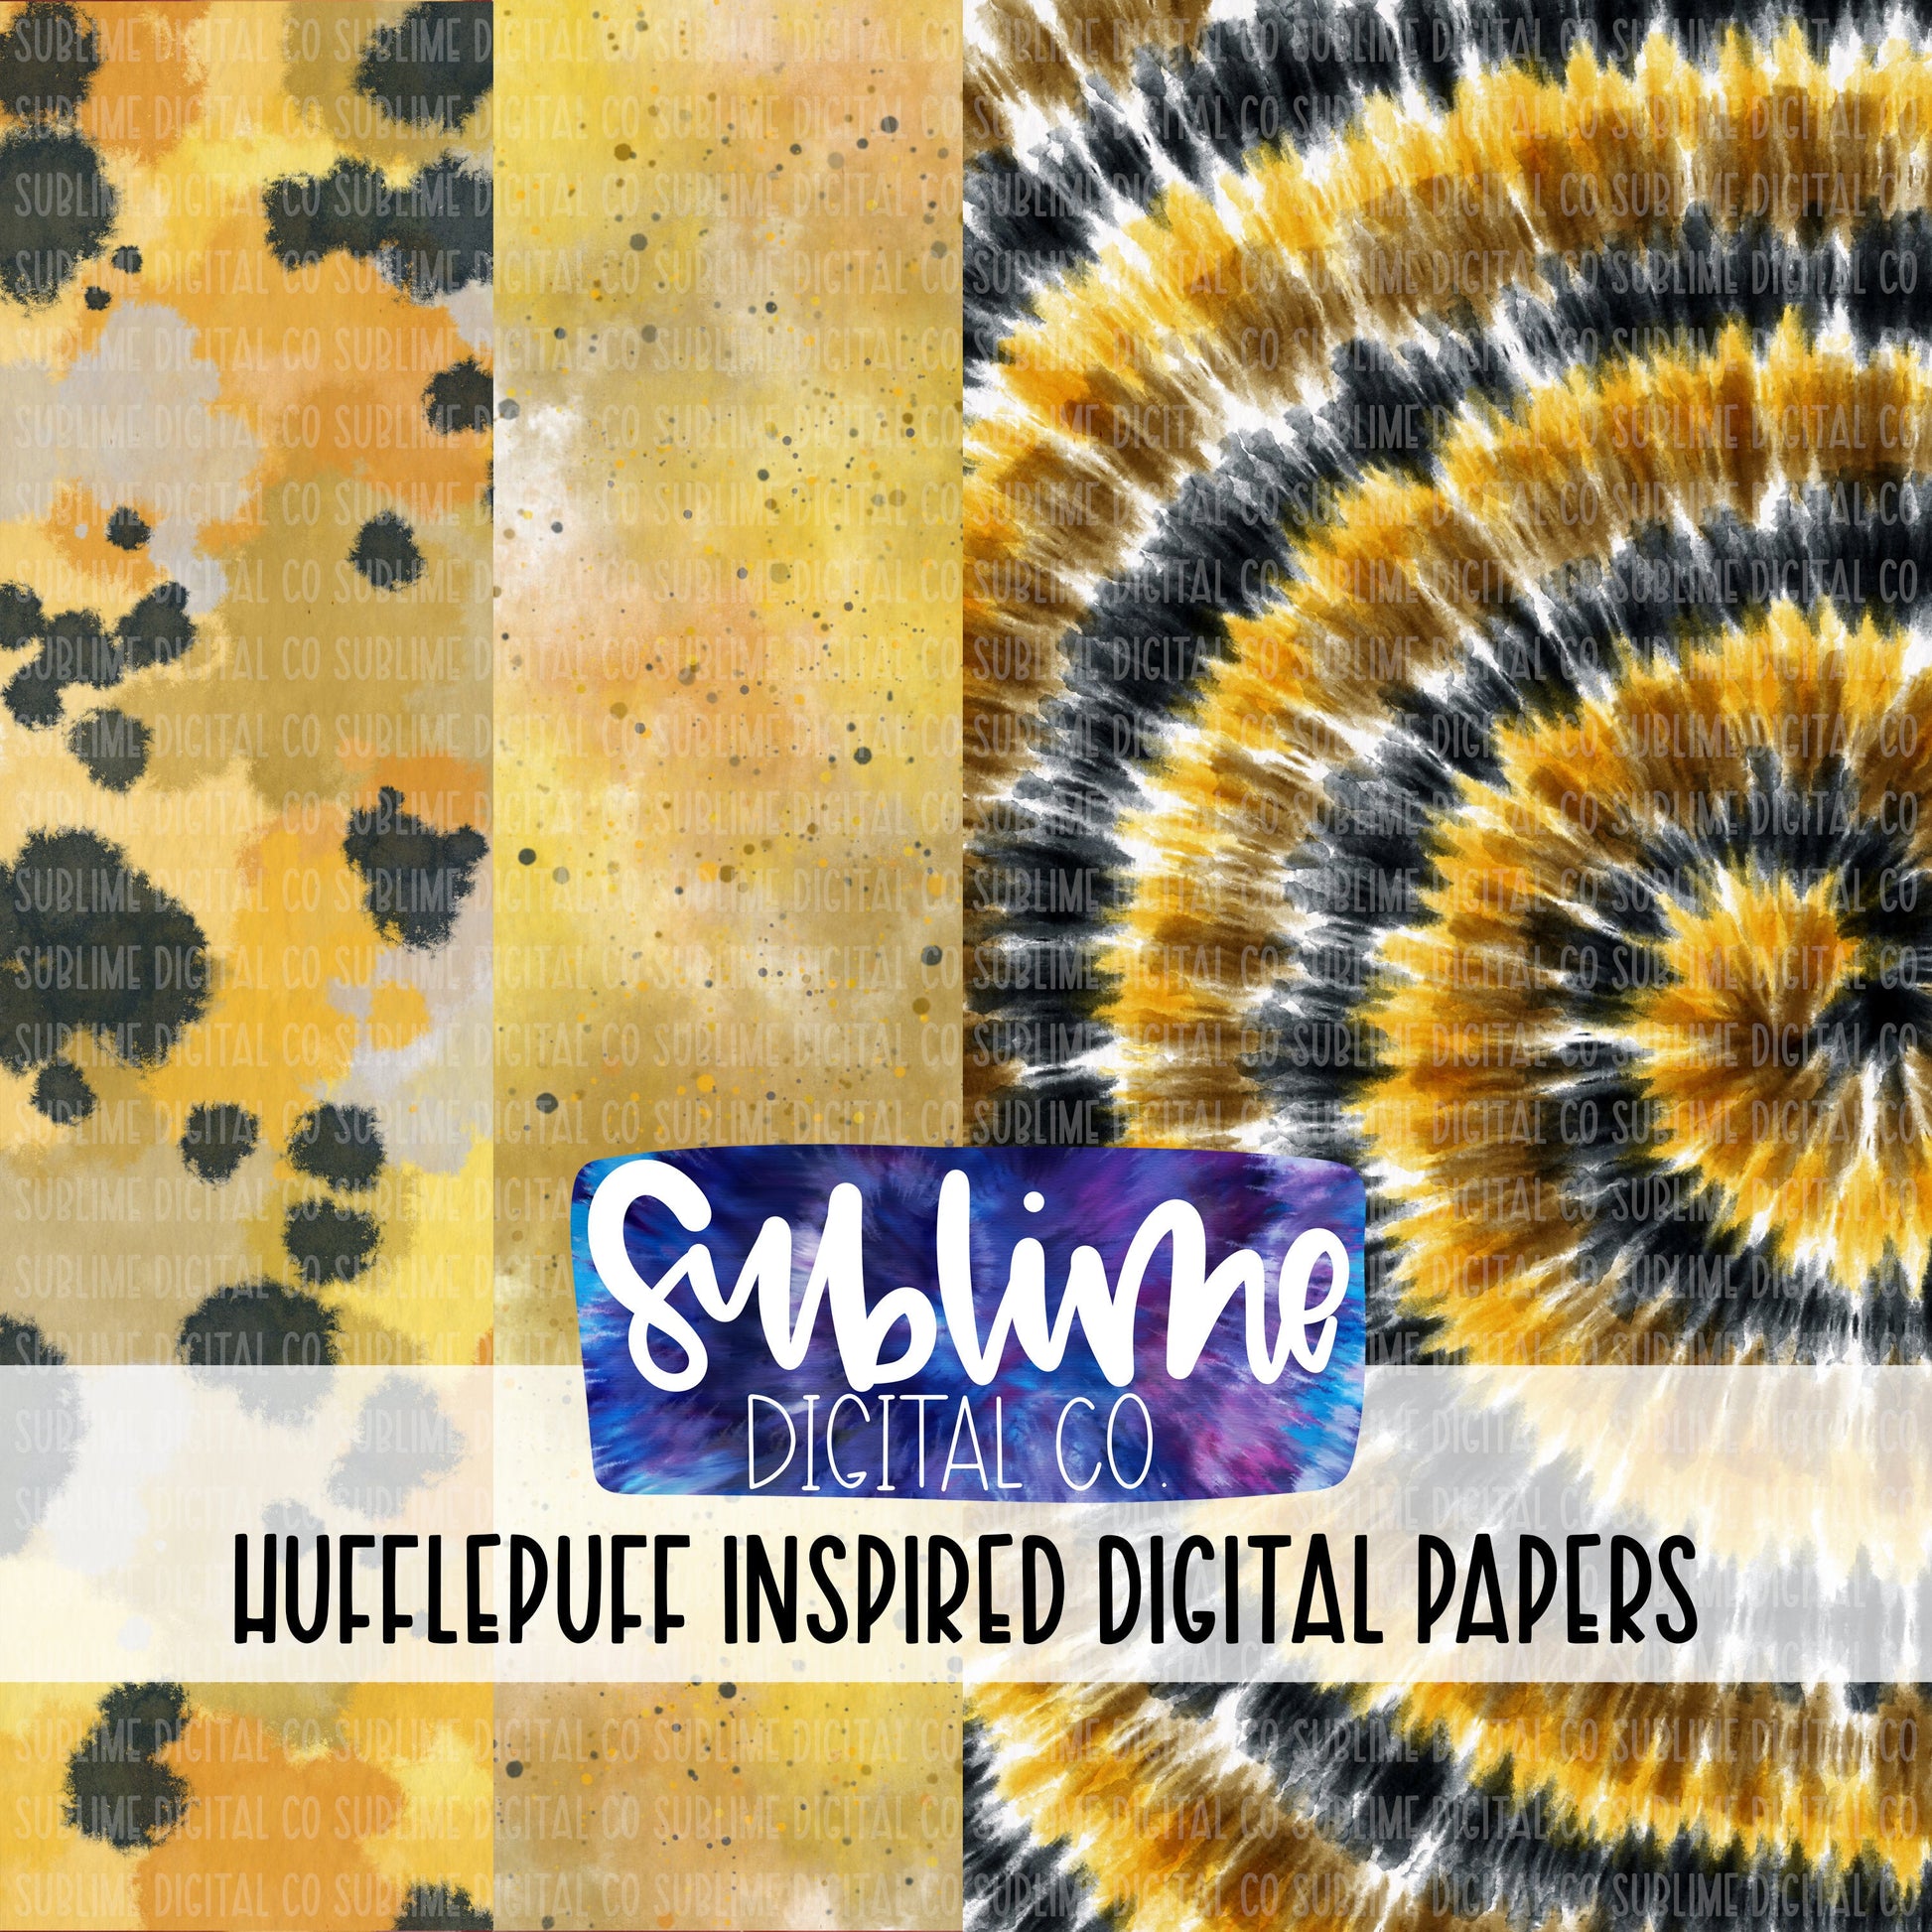 Hufflepuff Inspired • Digital Papers